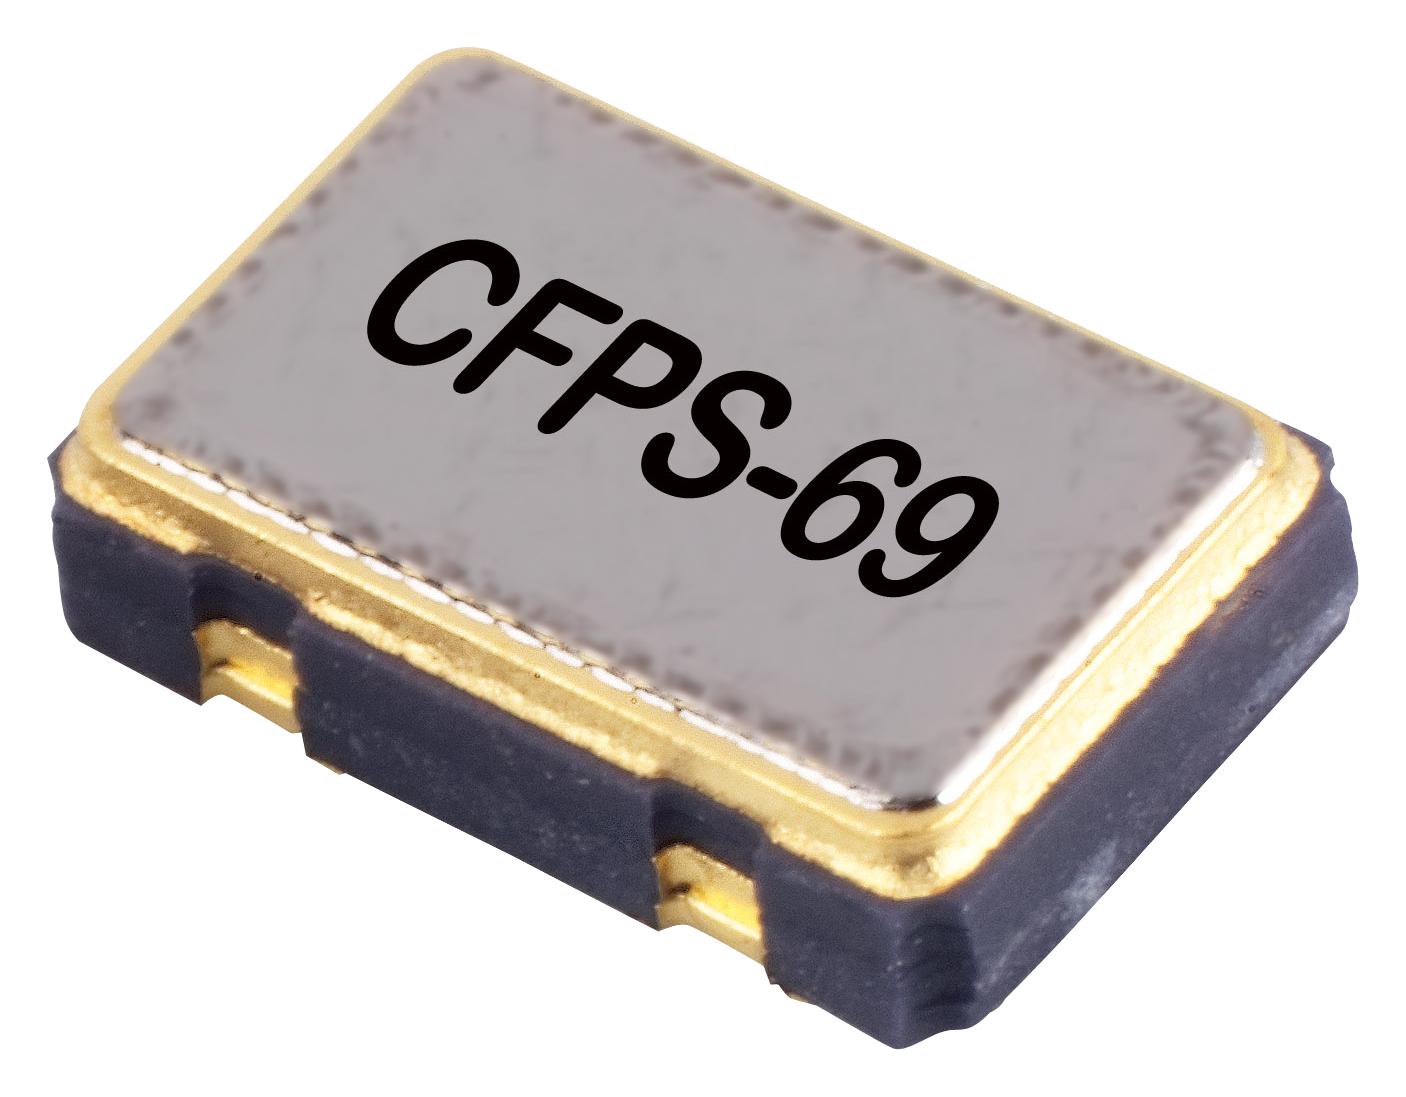 LFSPXO009589 CRYSTAL OSCILLATOR, SMD, 25MHZ IQD FREQUENCY PRODUCTS